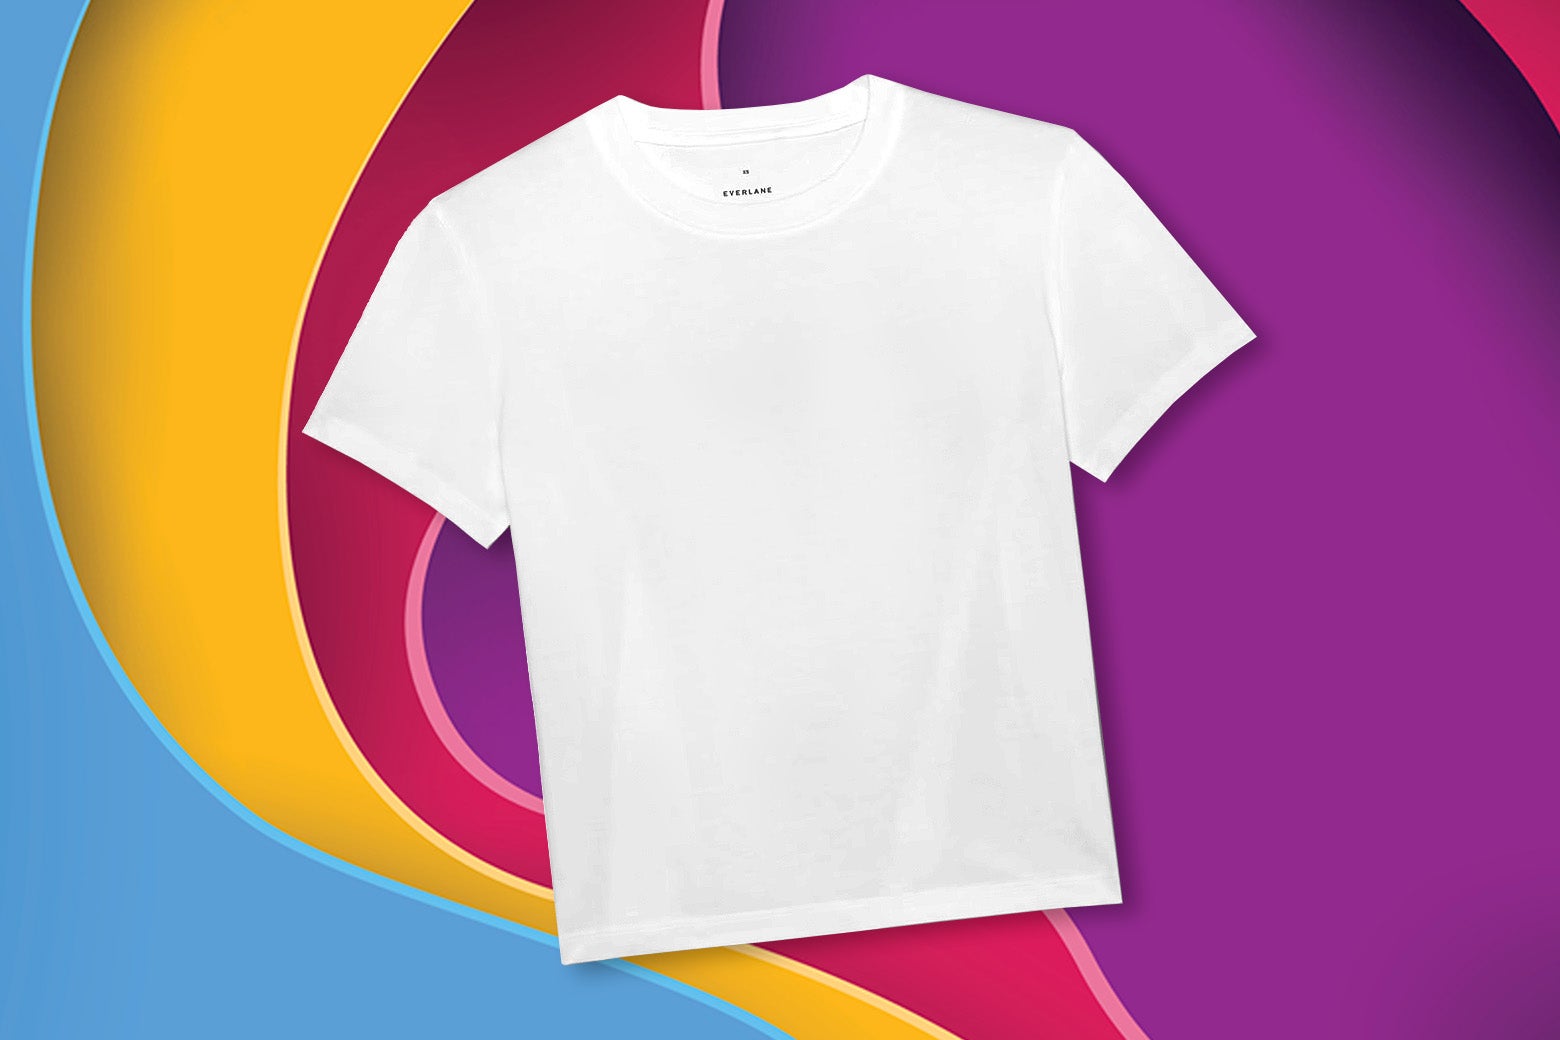 Everlane's winsome white T-shirt is displayed over the colorful One Thing art treatment.